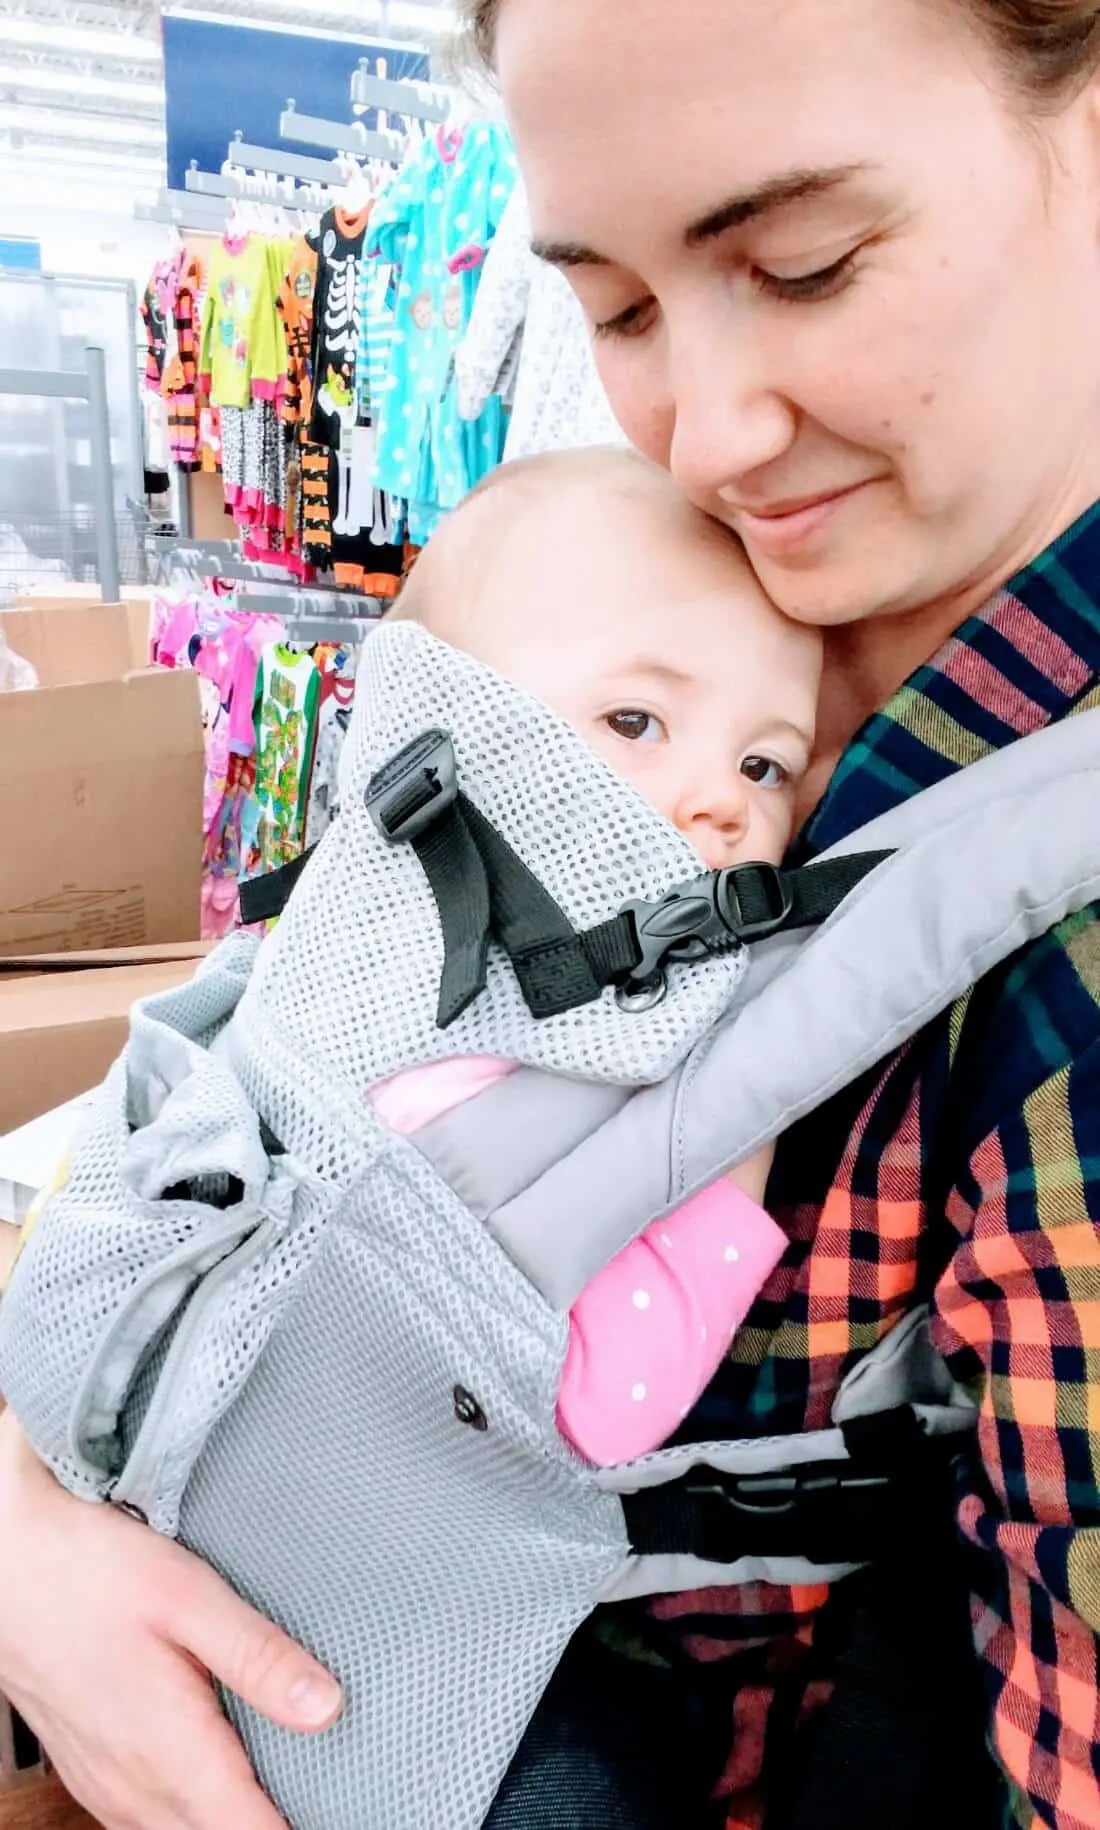 Mom wears baby at store using baby carrier.